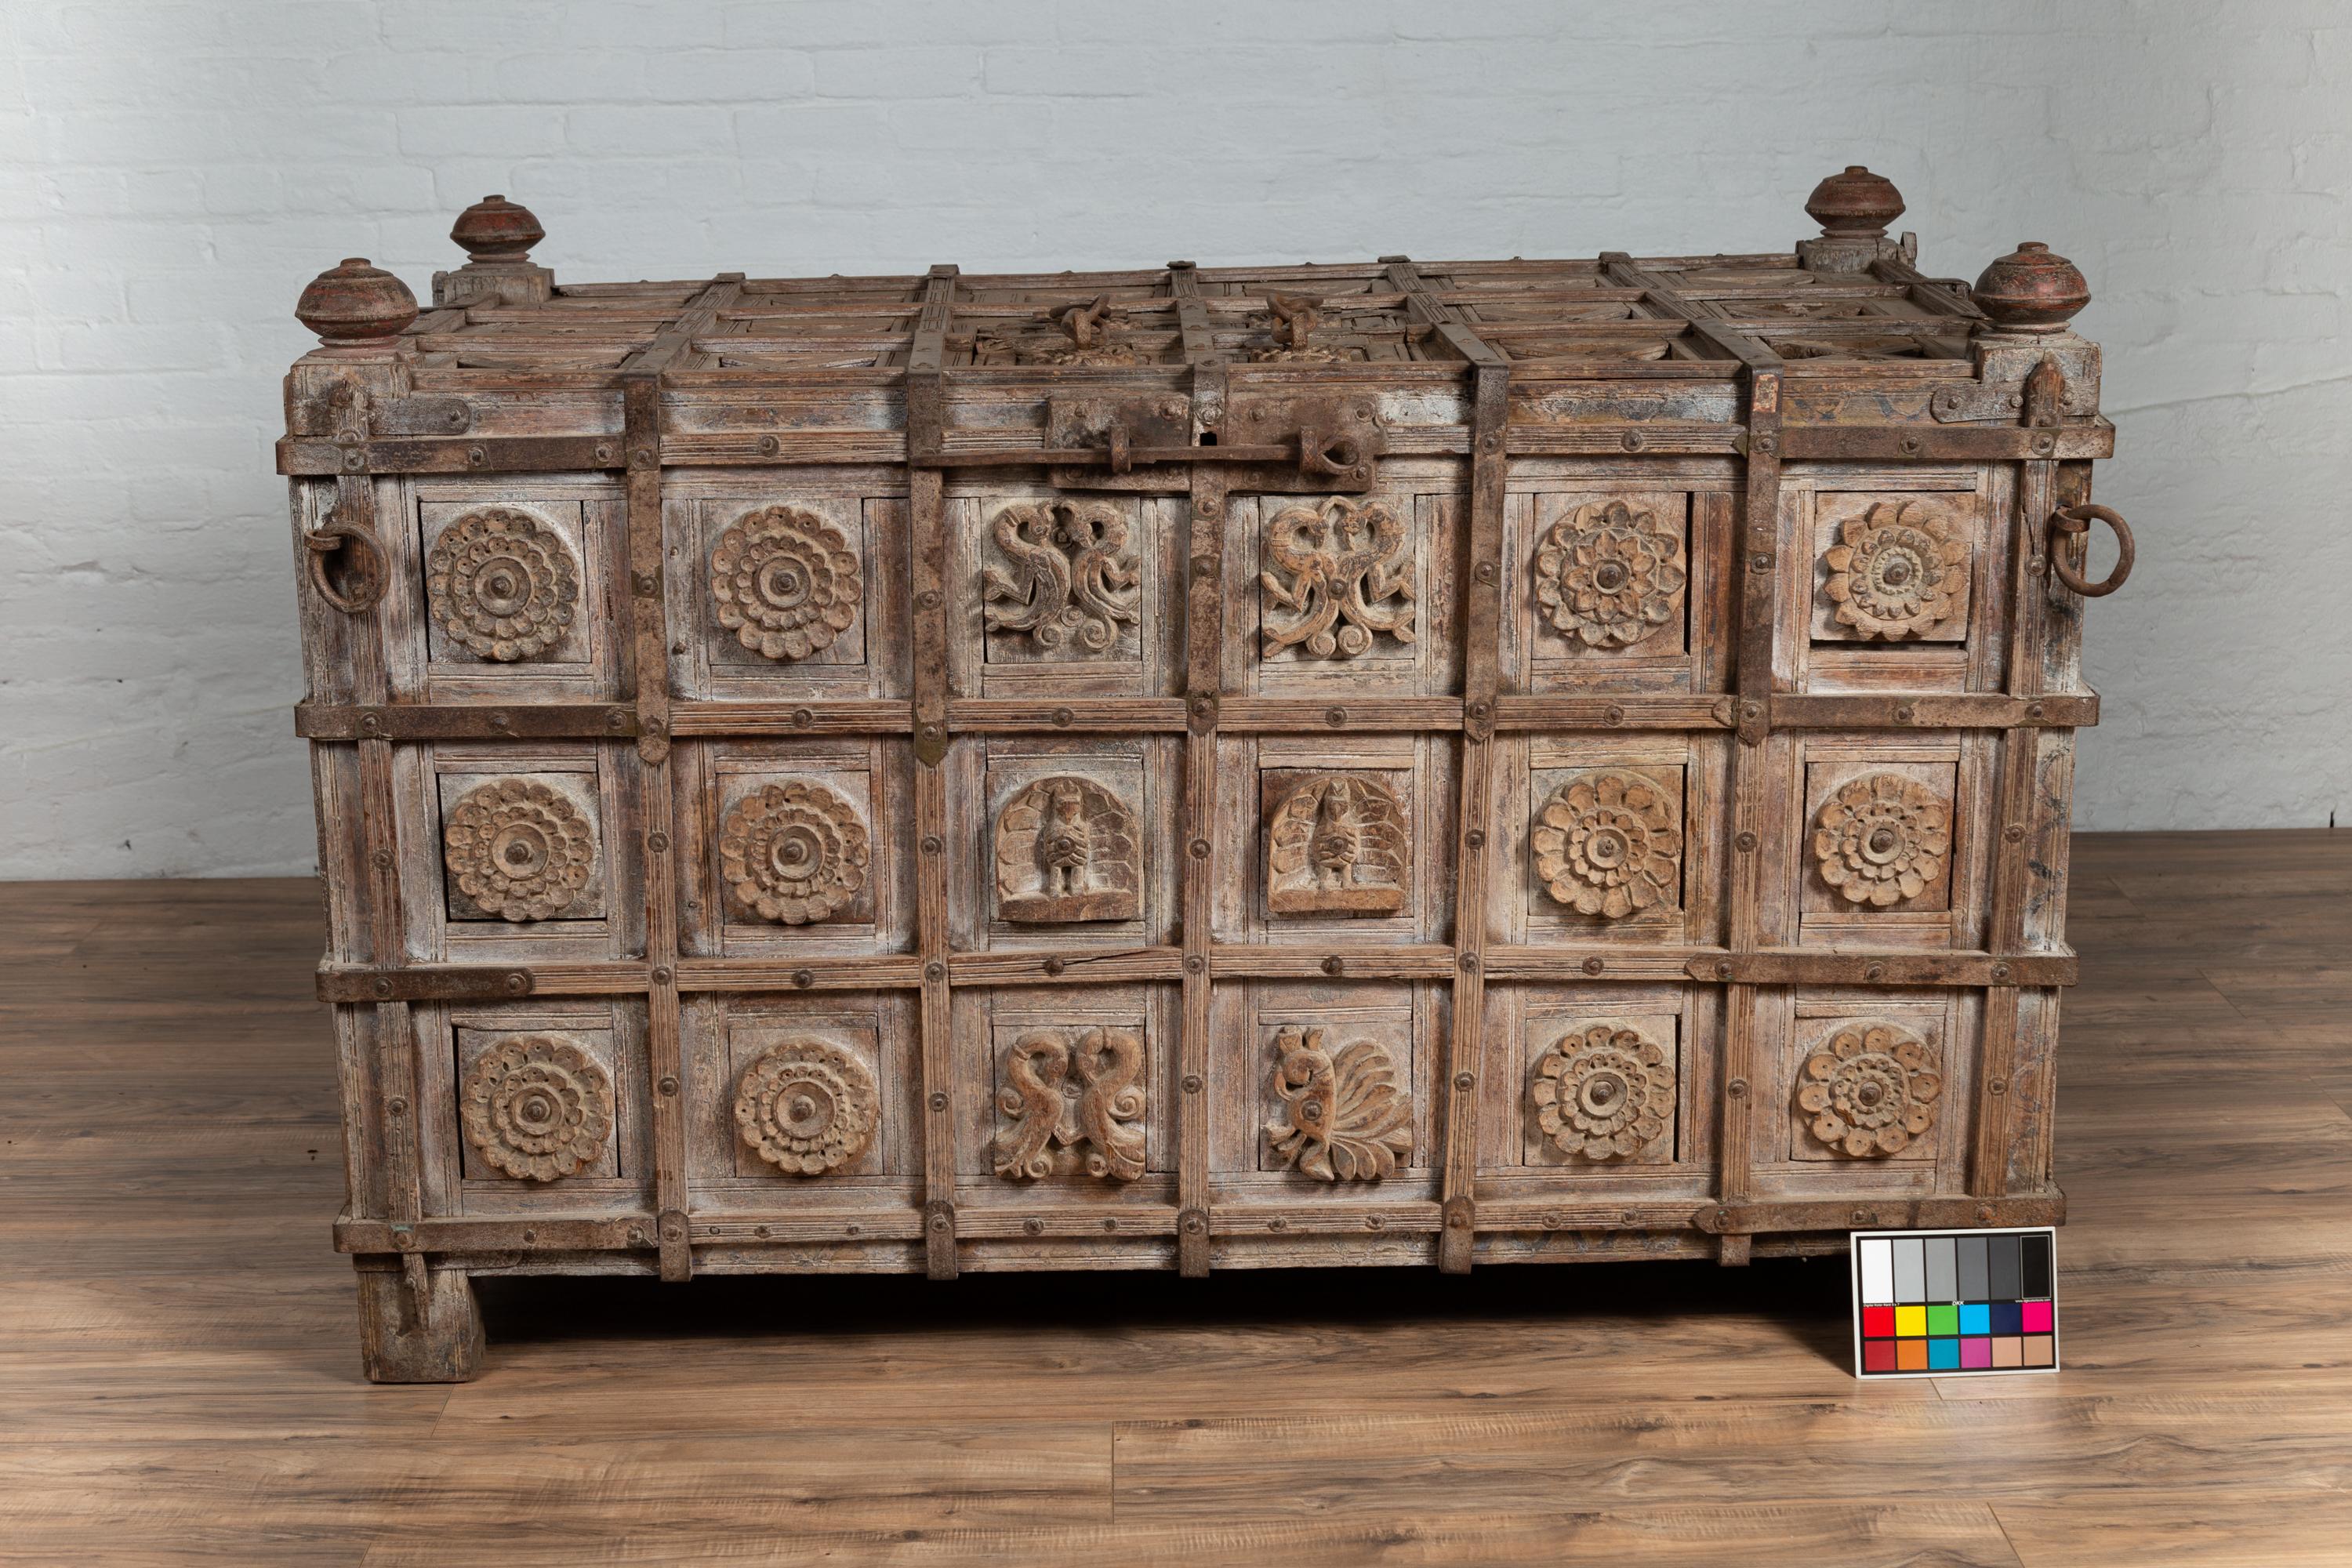 Oversized Indian Treasure Chest with Raised X Patterns, Rosettes and Animals 14